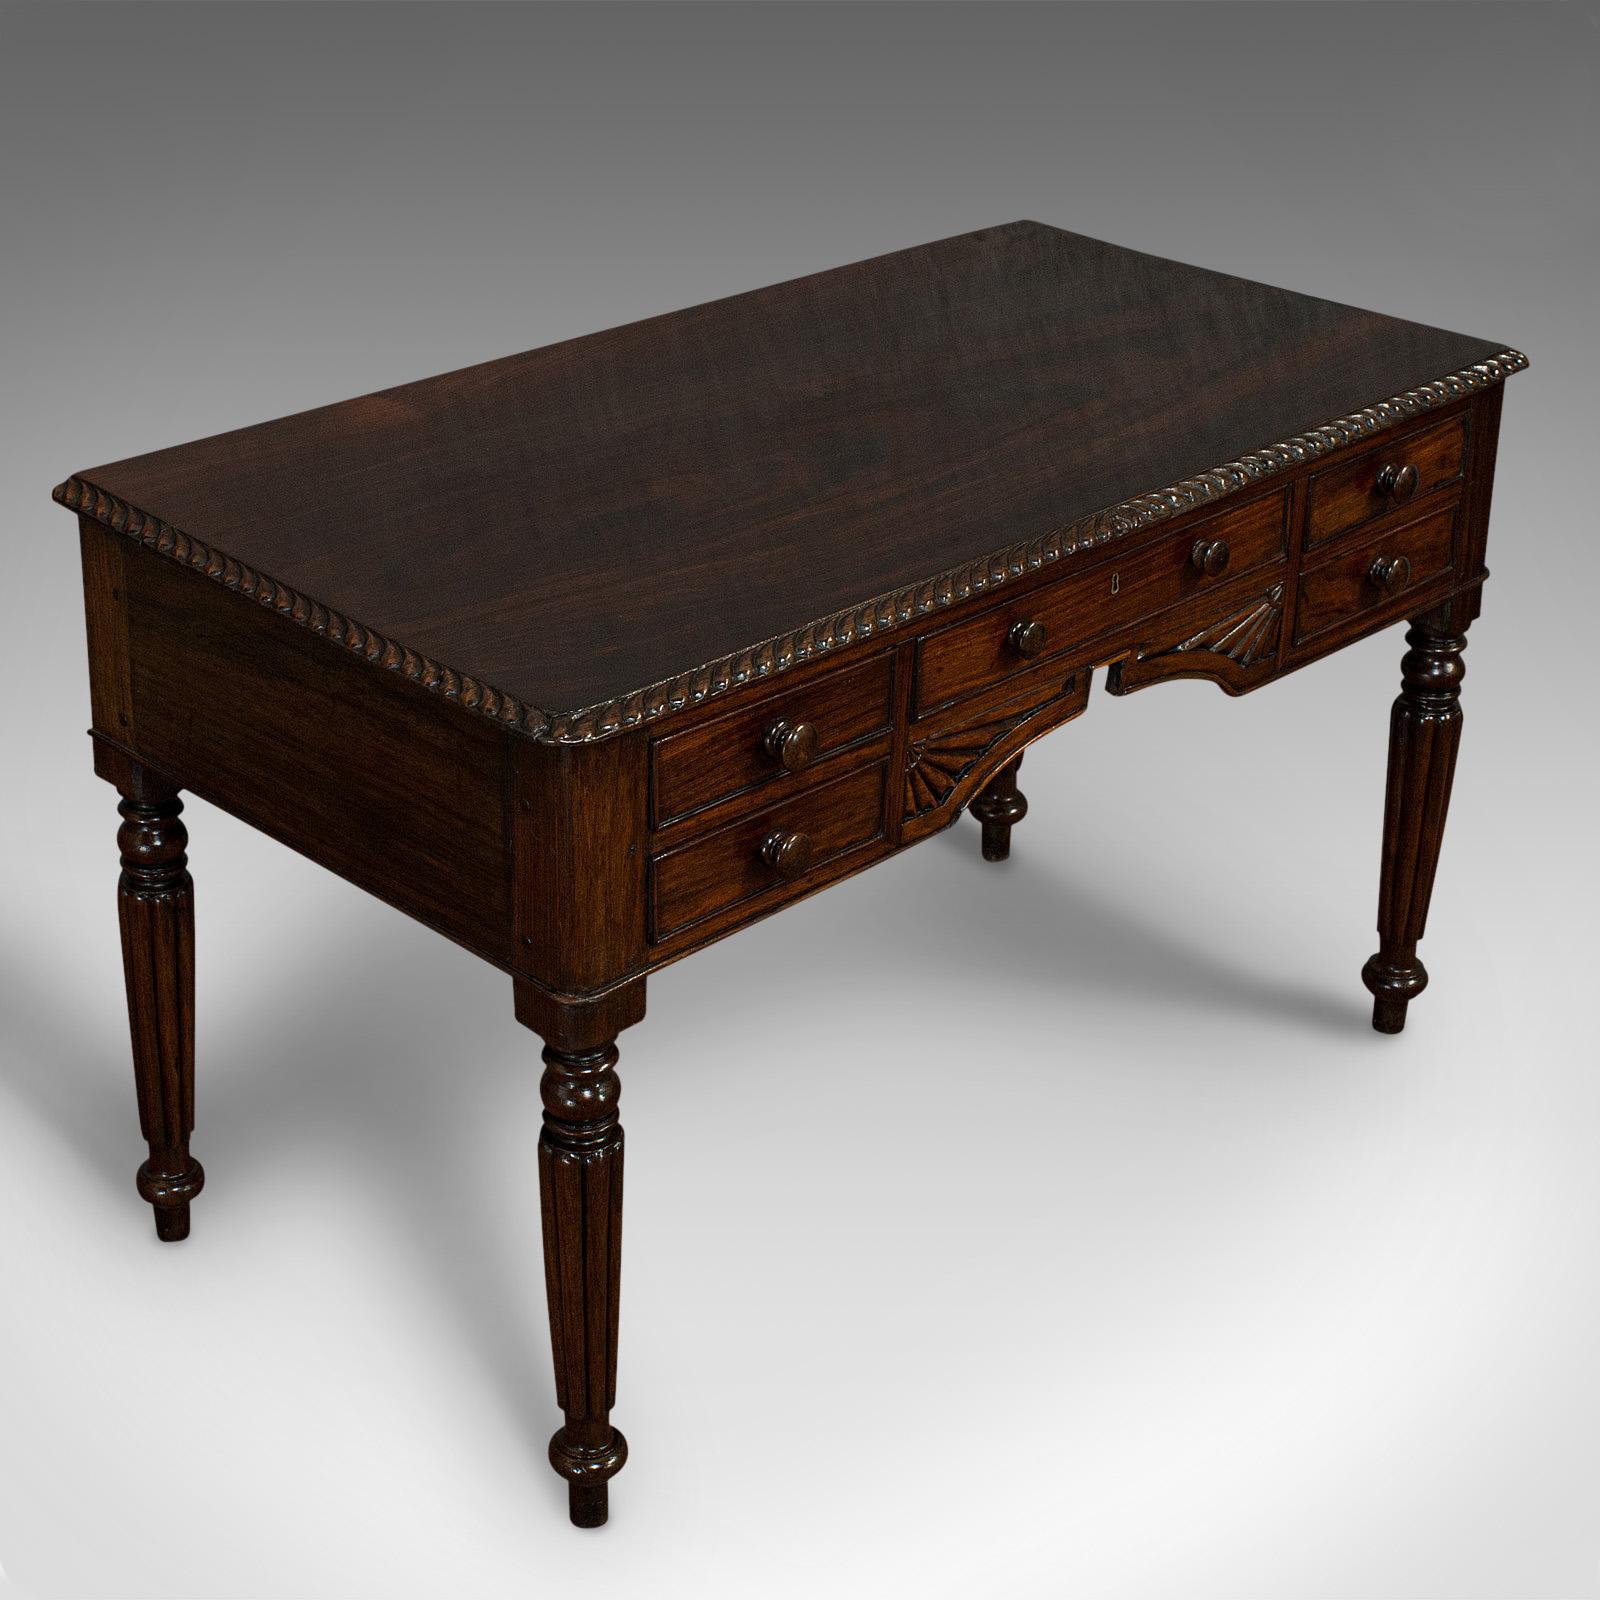 Antique Writing Desk, English, Rosewood, Study, Side, Table, Regency, circa 1820 In Good Condition For Sale In Hele, Devon, GB